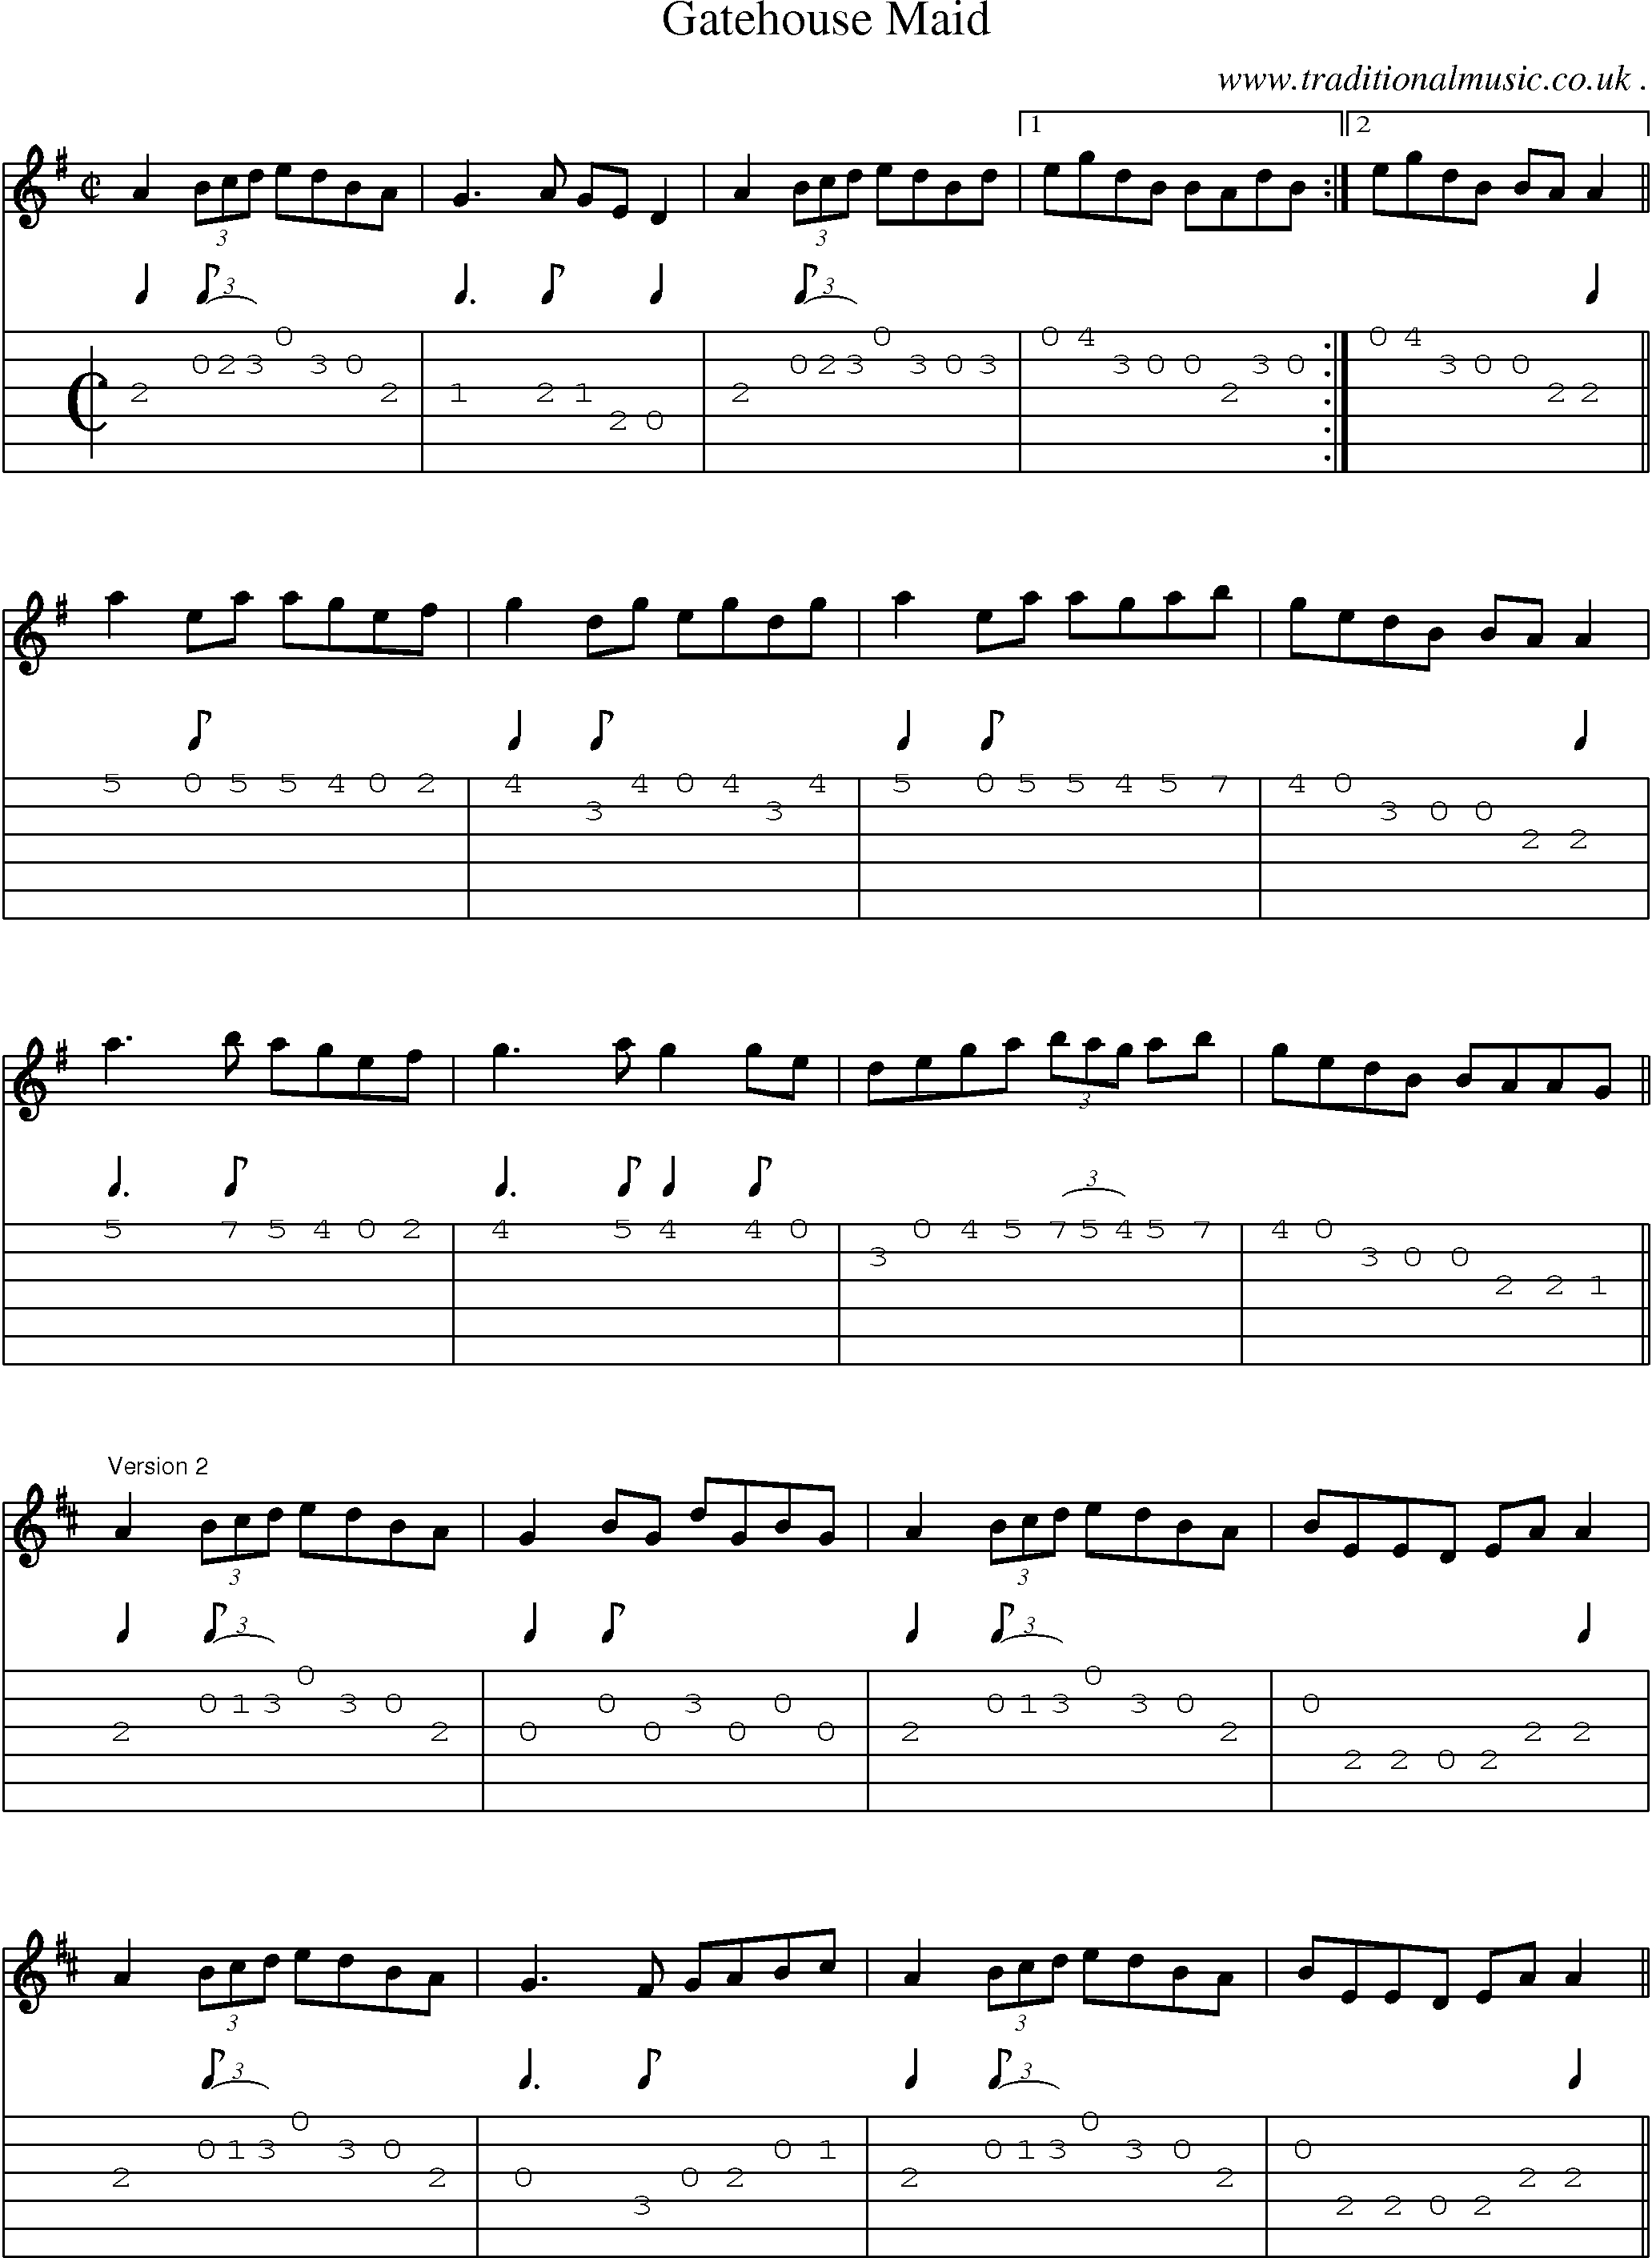 Sheet-Music and Guitar Tabs for Gatehouse Maid